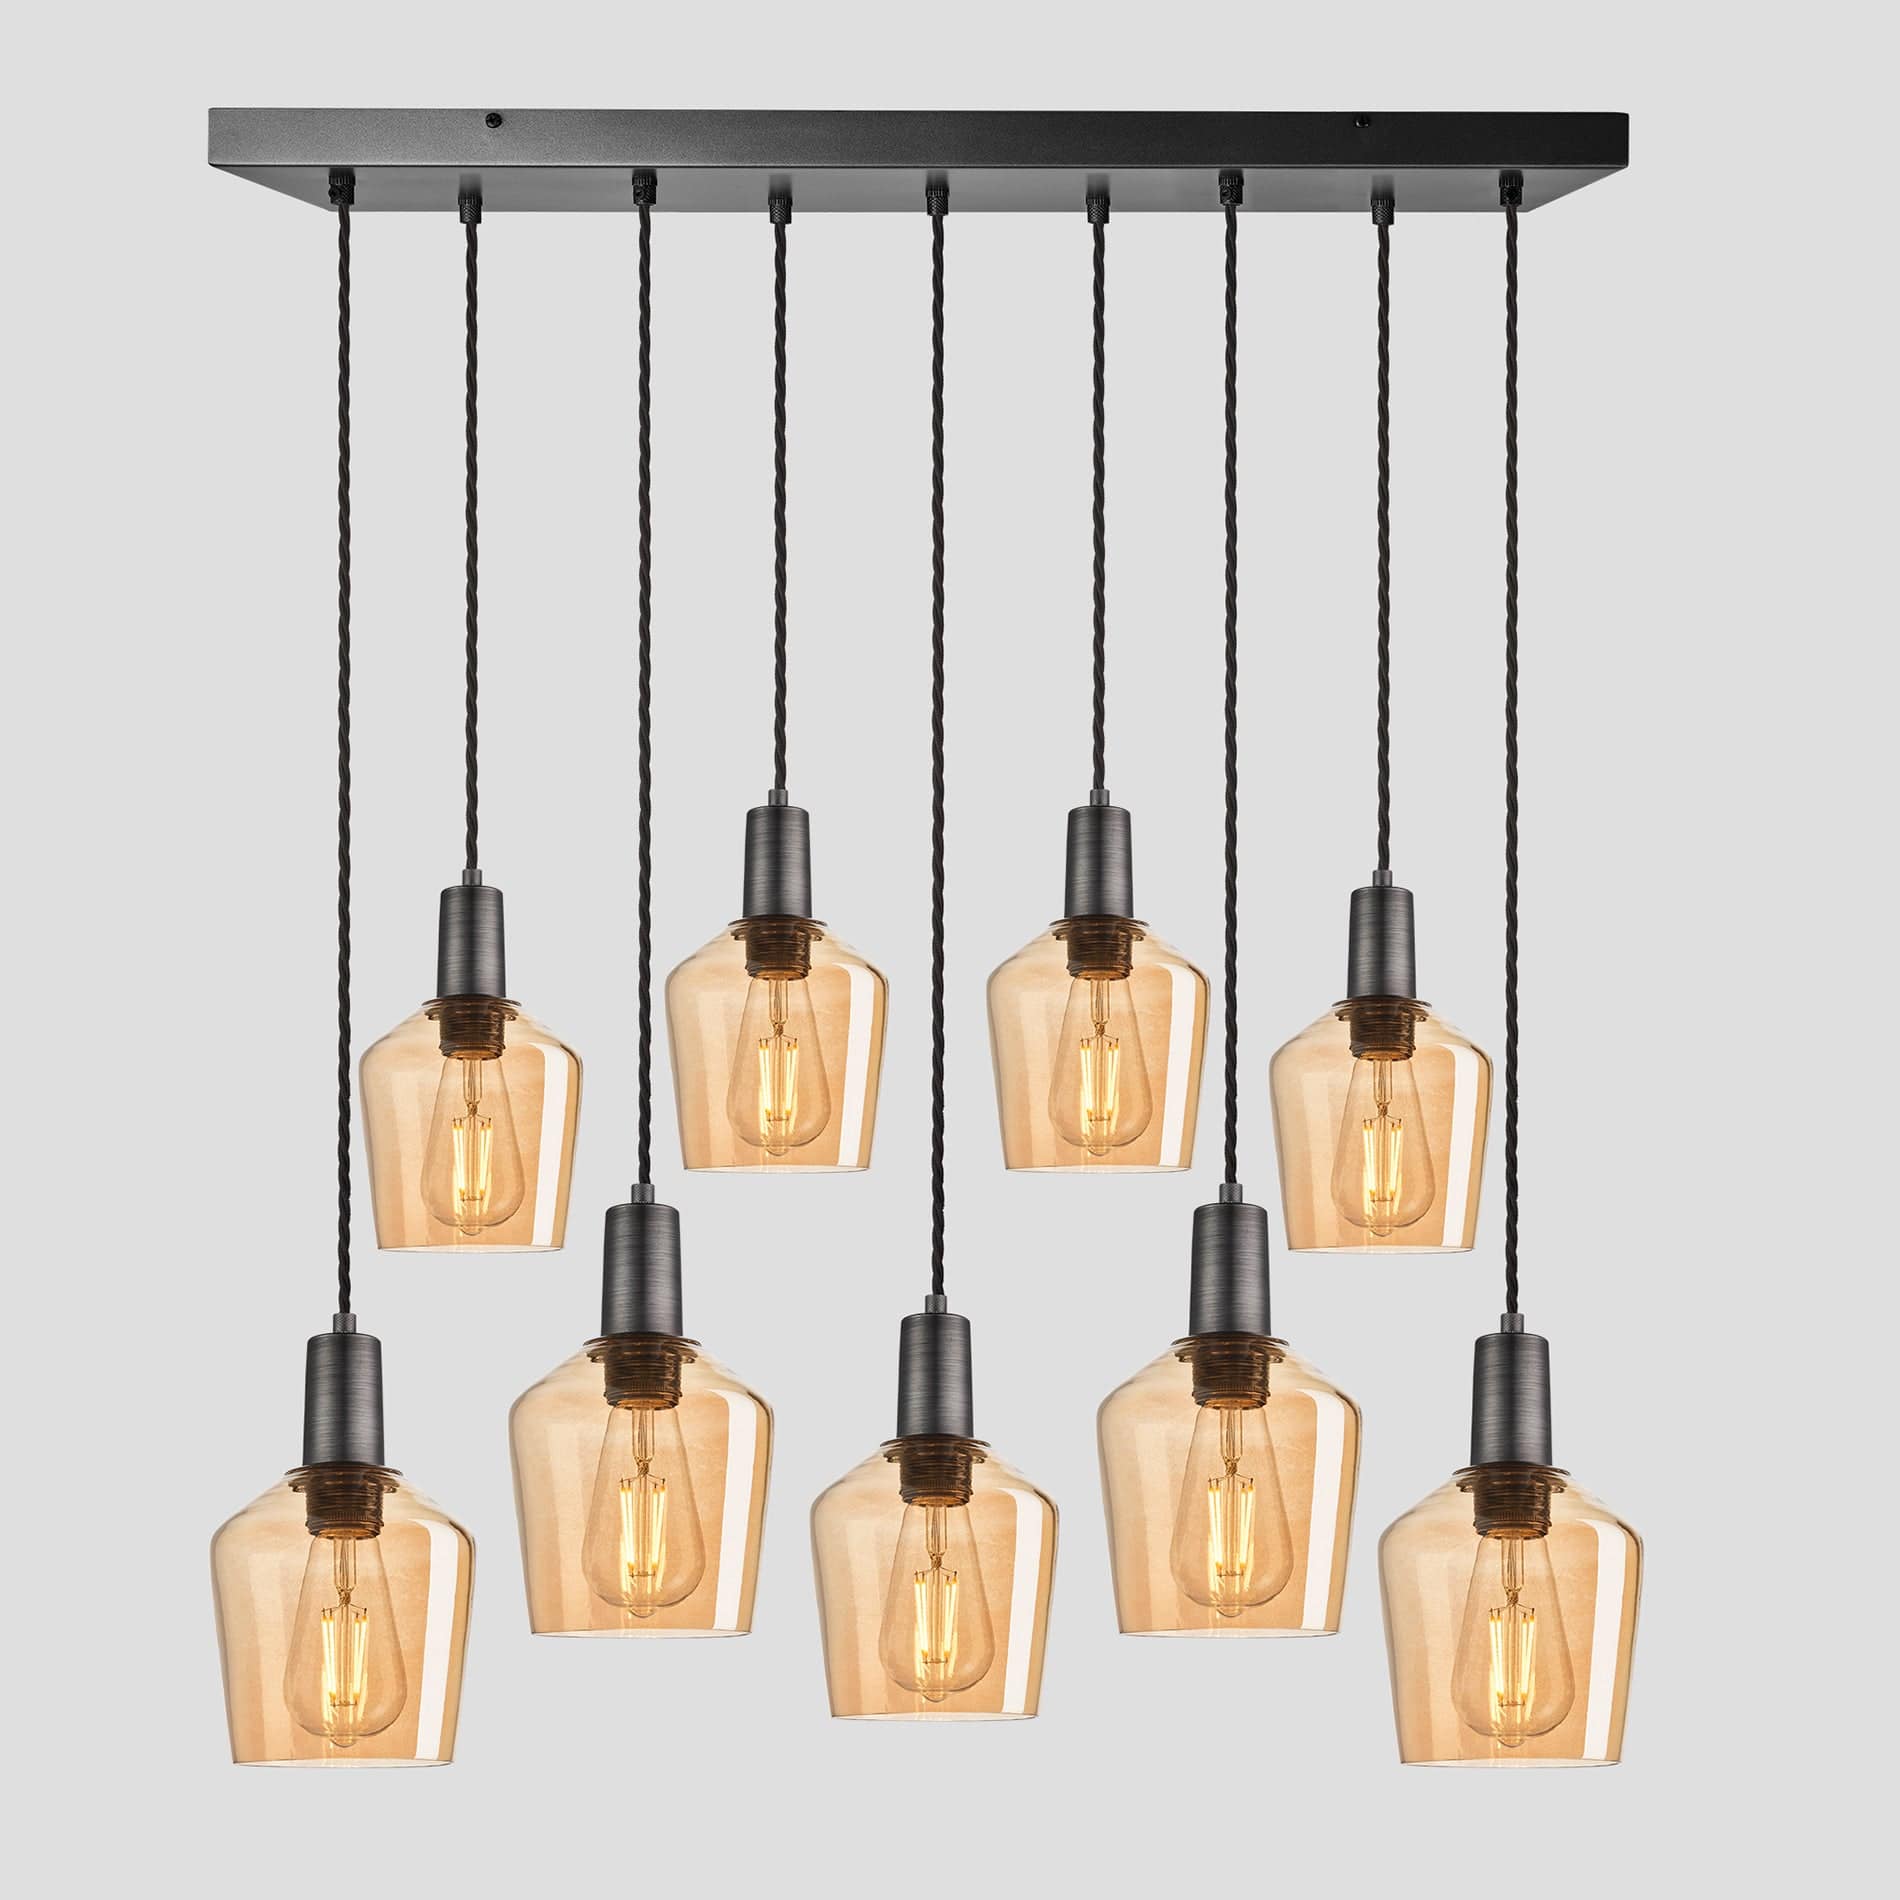 Sleek Tinted Glass Schoolhouse 9 Wire Cluster Lights - 5.5 inch - Amber Industville SL-TGL-SH5-9WCL-A-PH